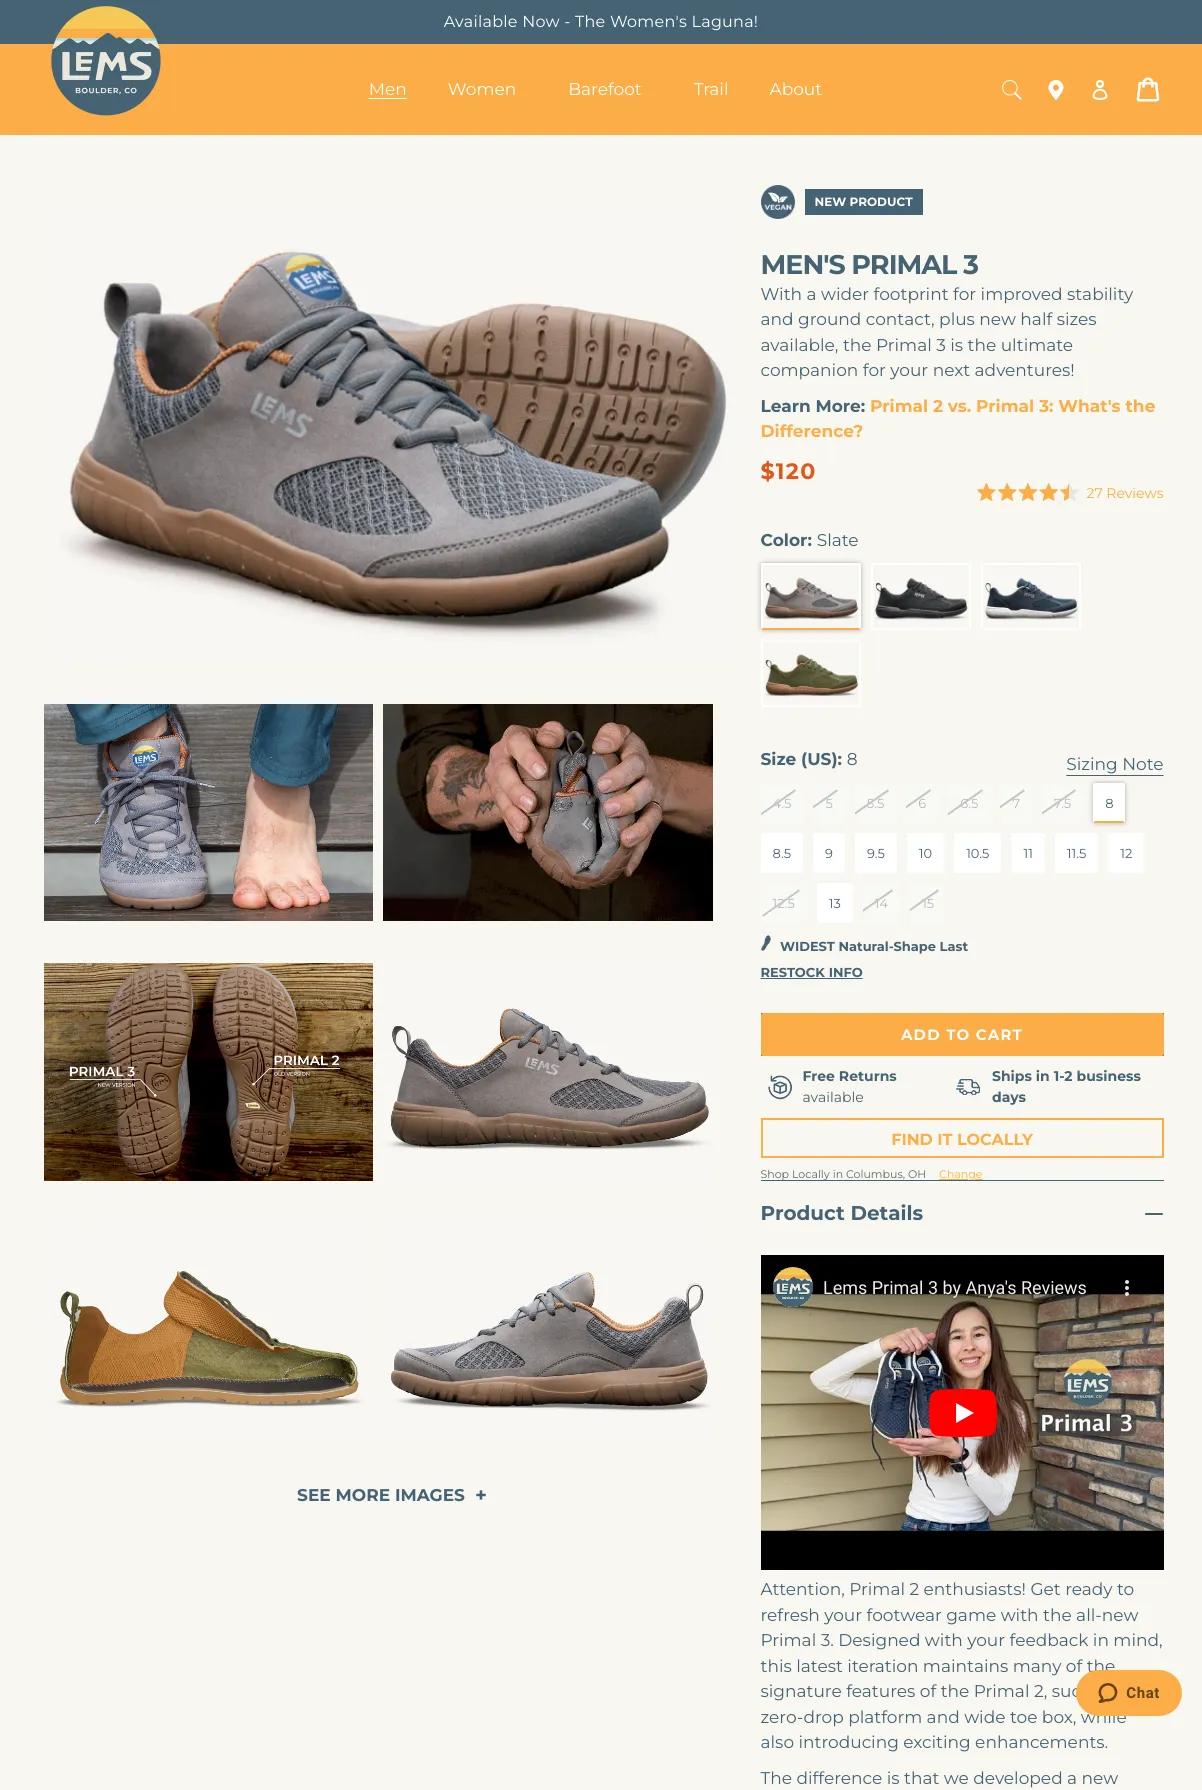 Screenshot 2 of Lems Shoes (Example Shopify Clothing Website)